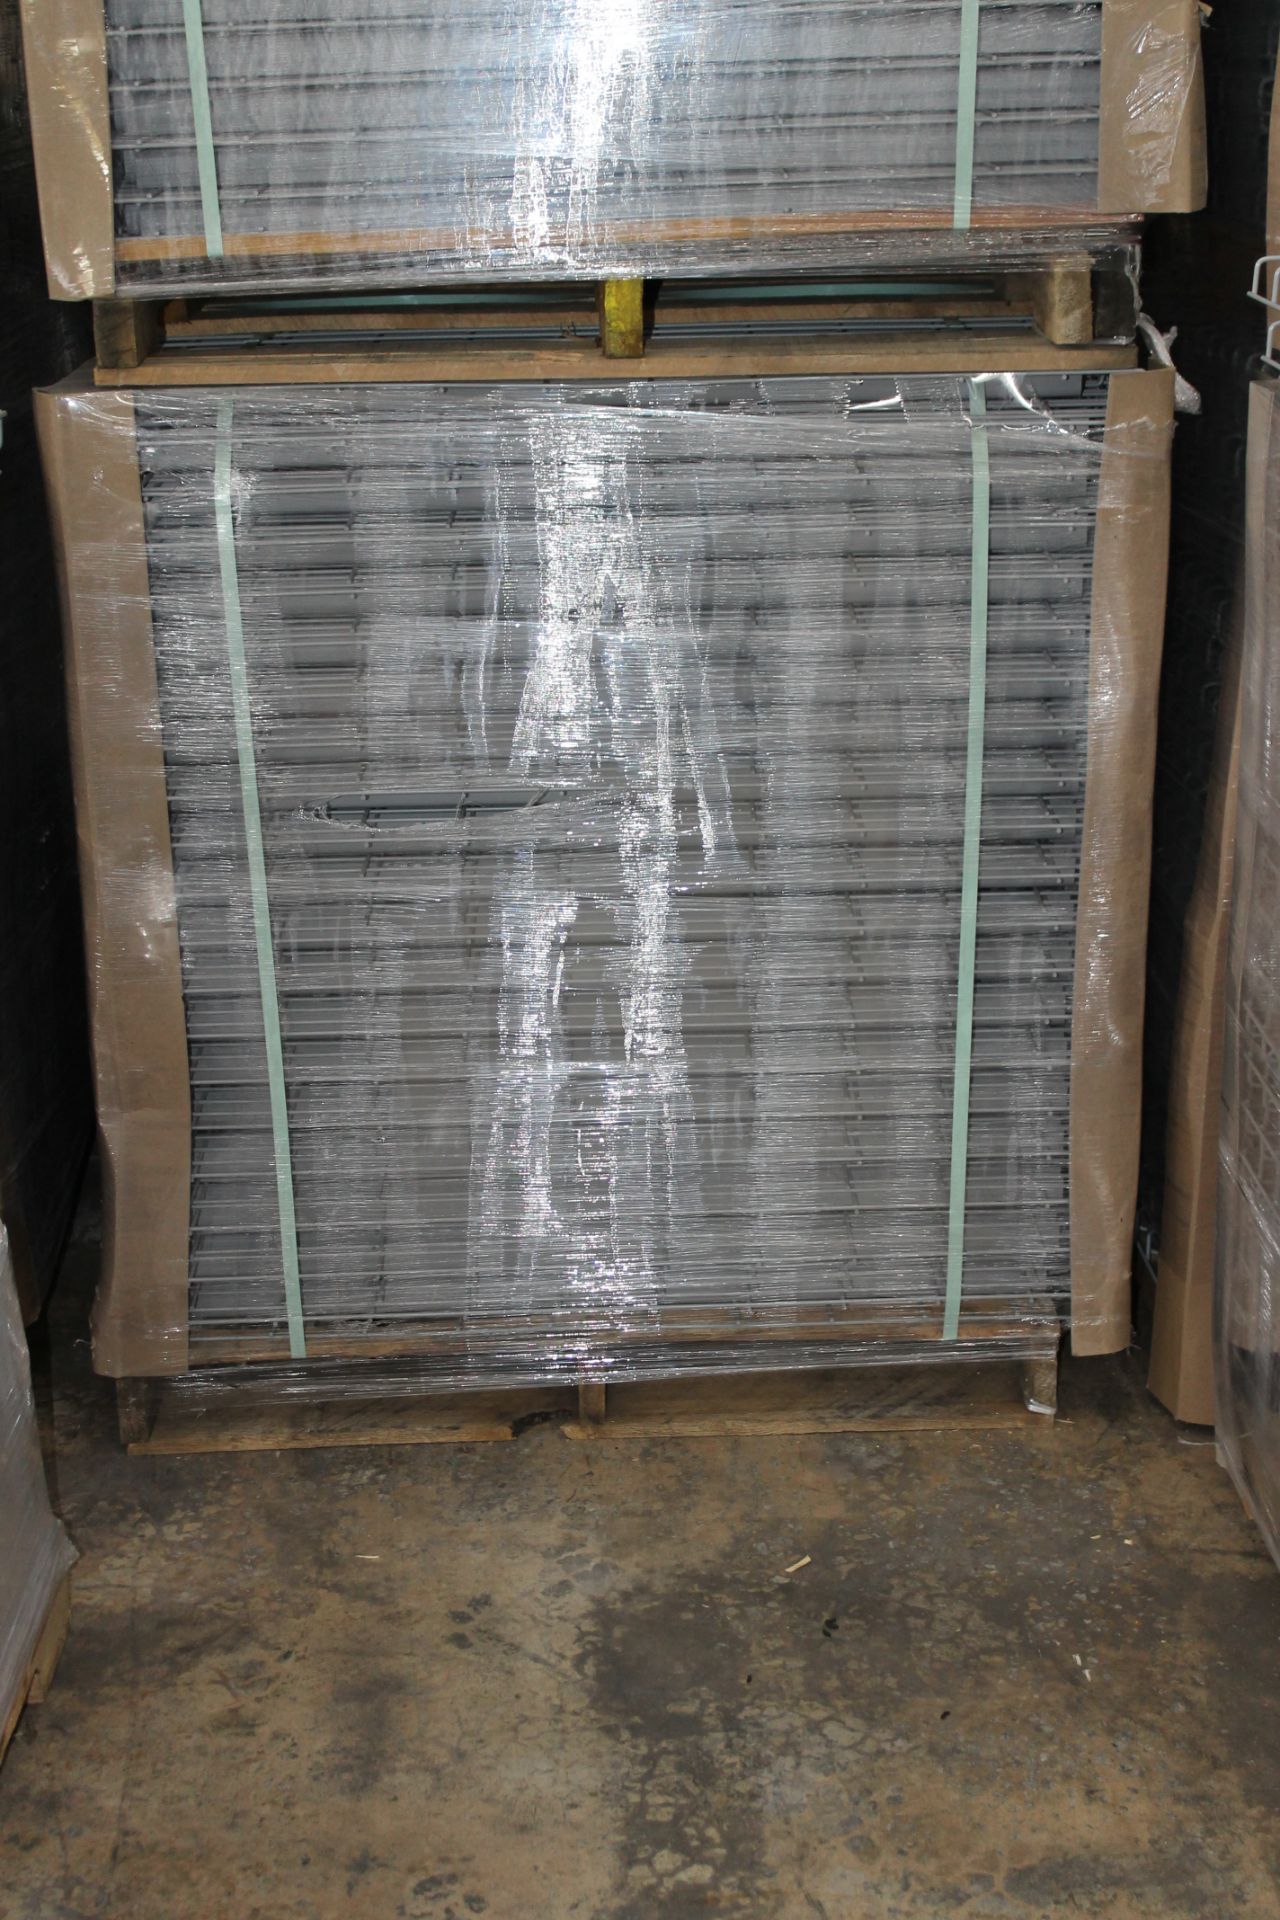 NEW 40 PCS OF STANDRD 42" X 46" WIREDECK - 2200 LBS CAPACITY - Image 3 of 3